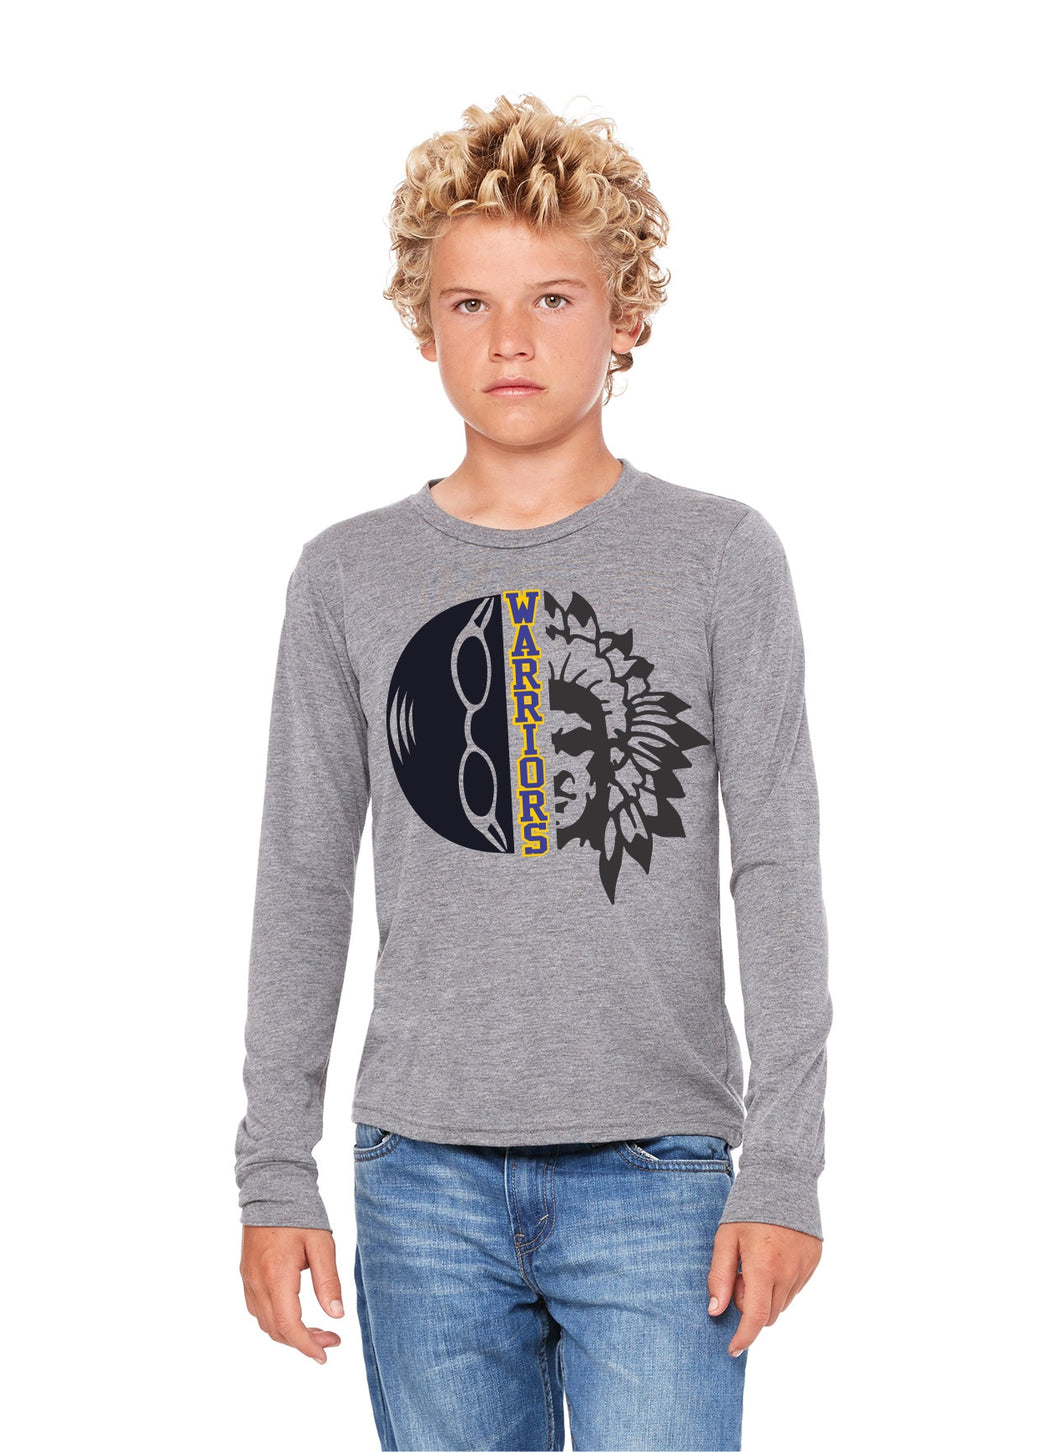 Swimming Warrior Head Long Sleeved Youth